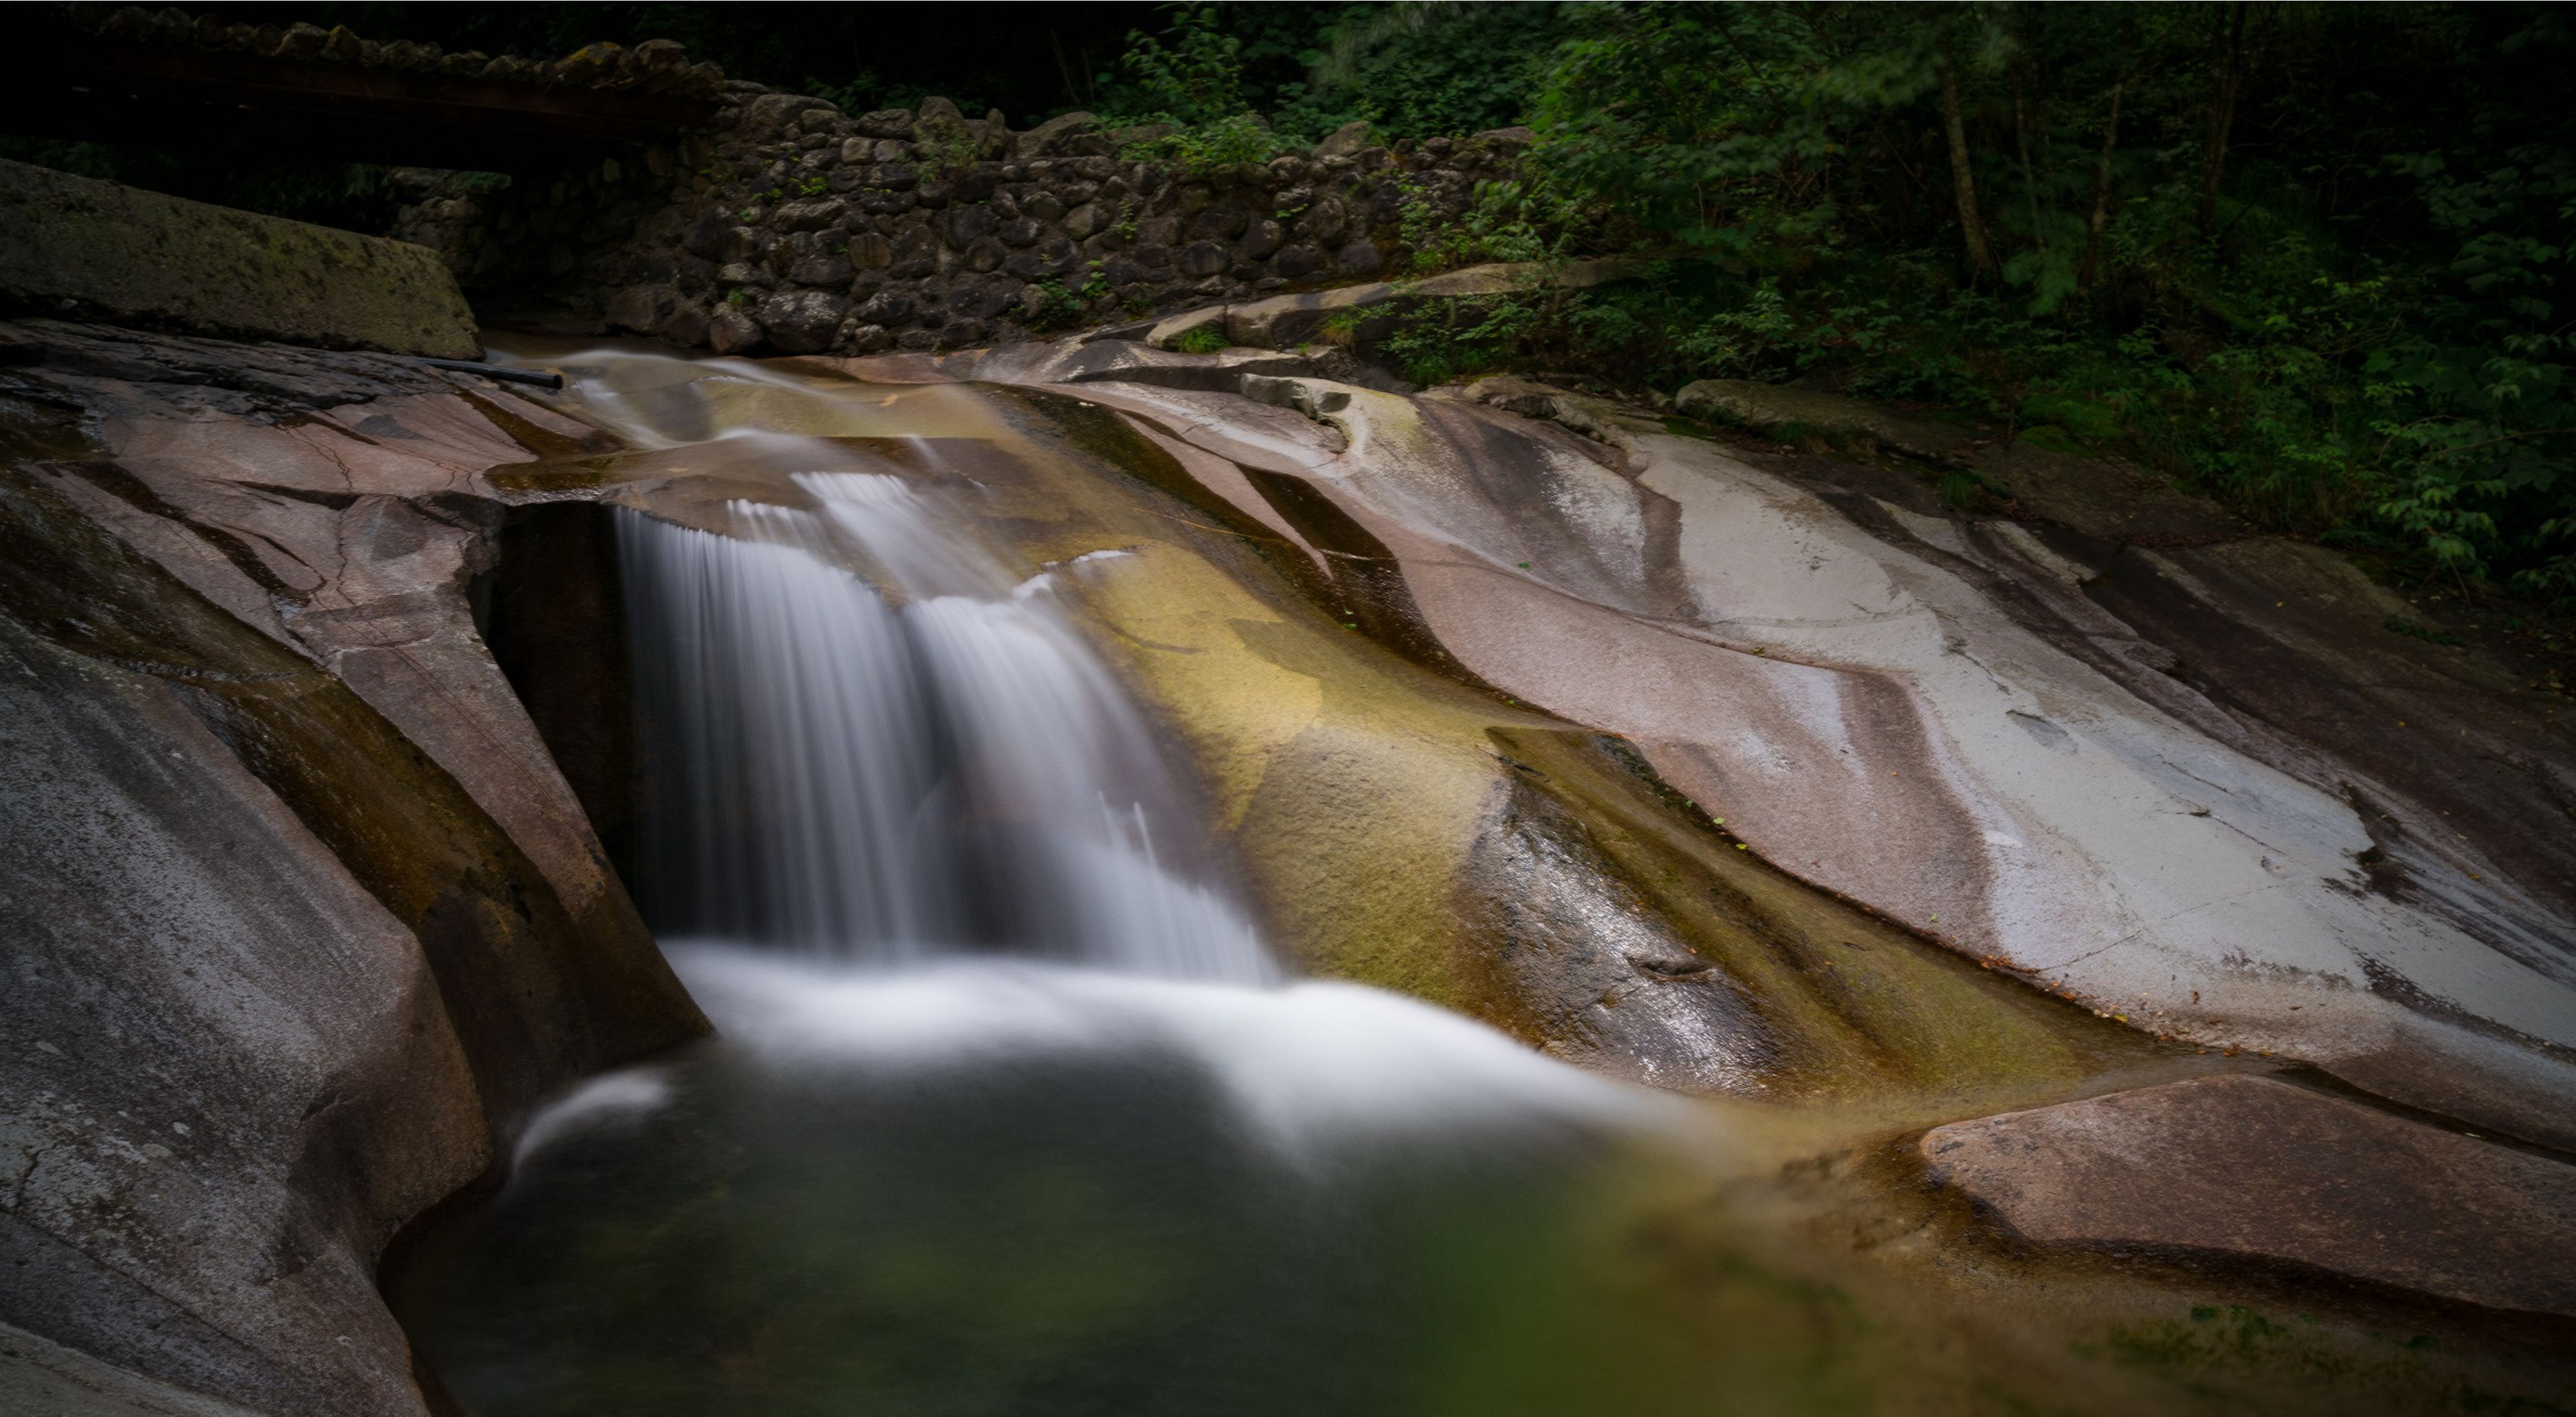 A running stream flows over rocks in Laohegou, Sichuan Province.